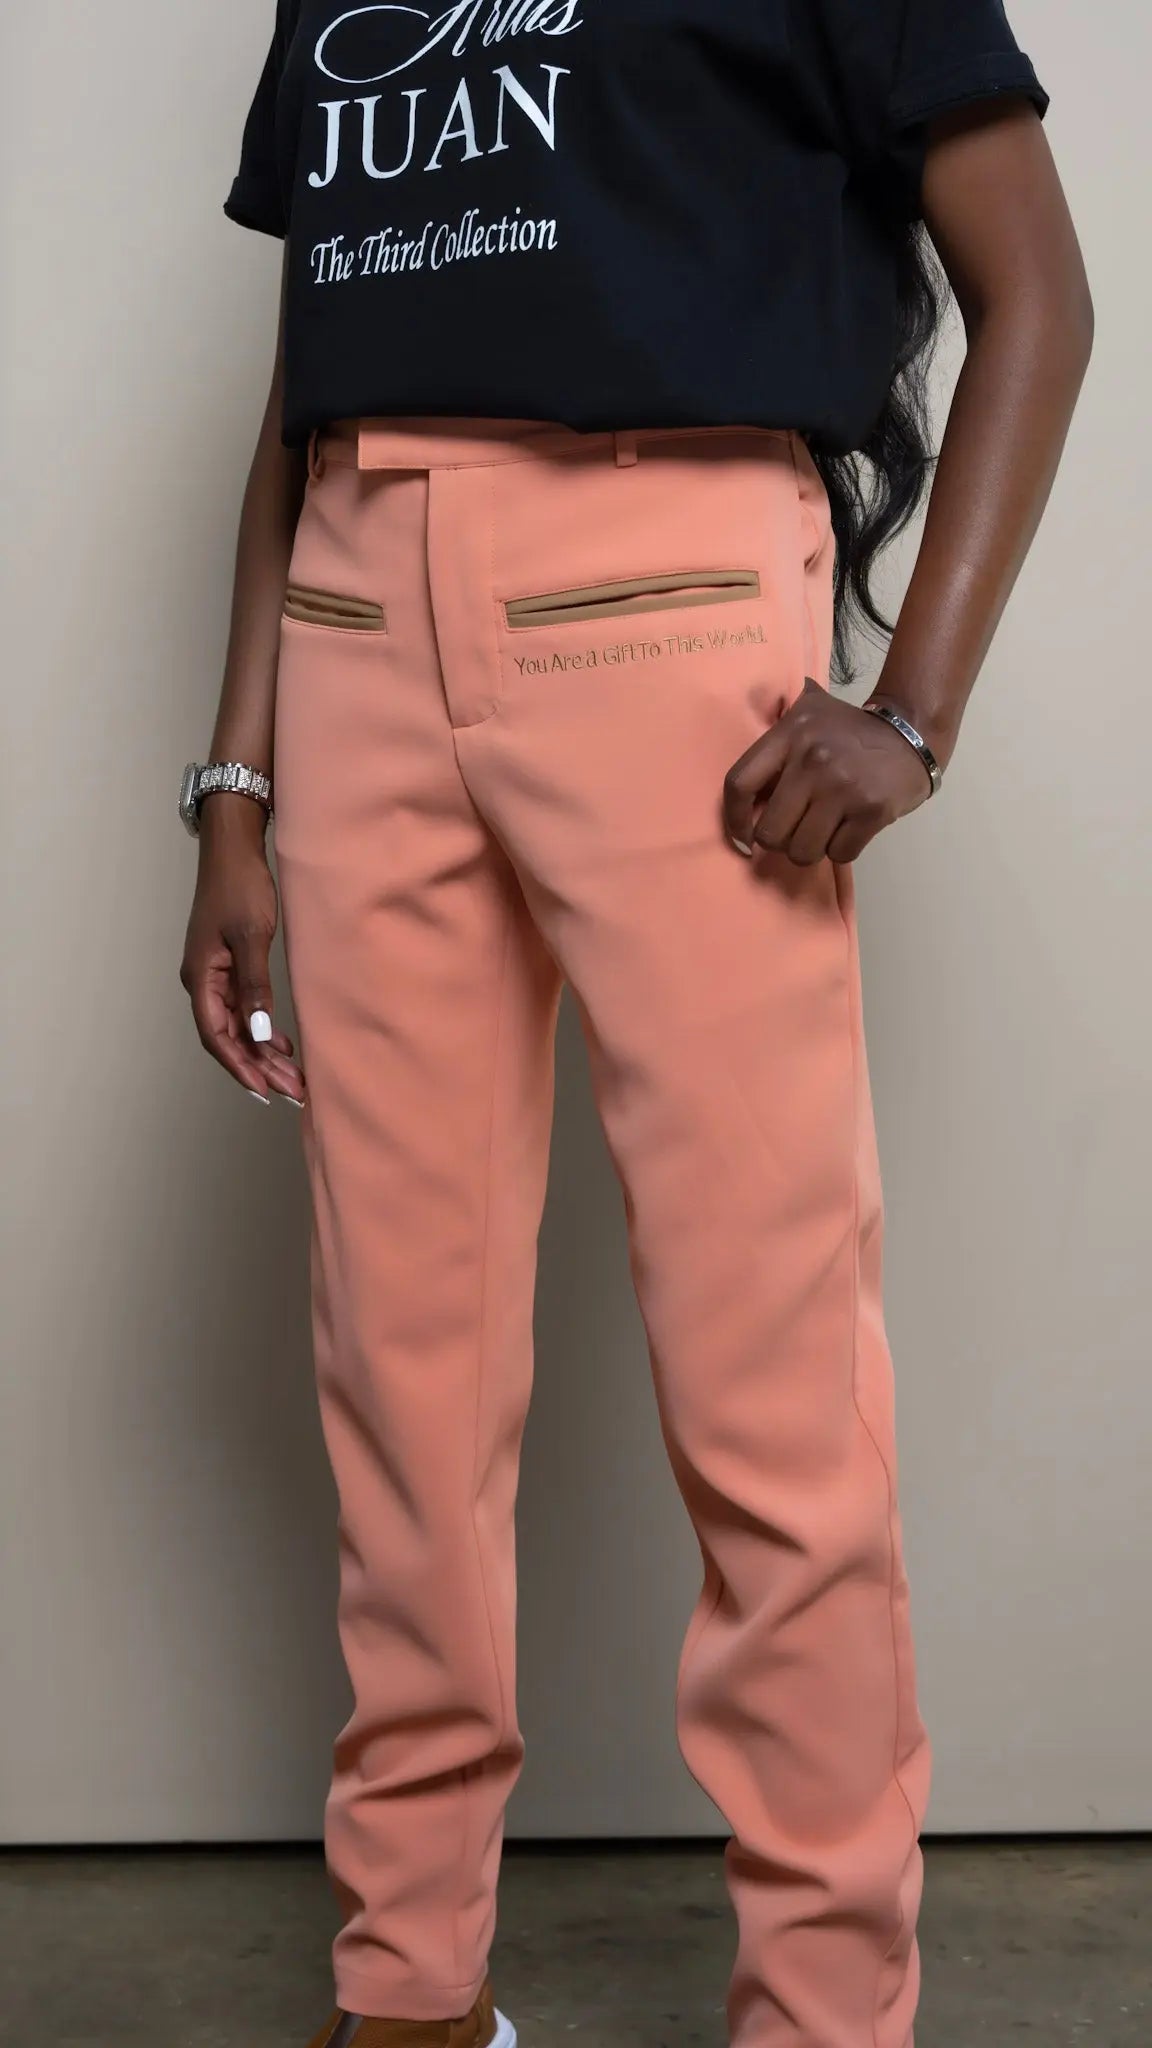 Photo of model in the Arius Juan Nature's Gift: Salmon Pink Pants posing for product picture.